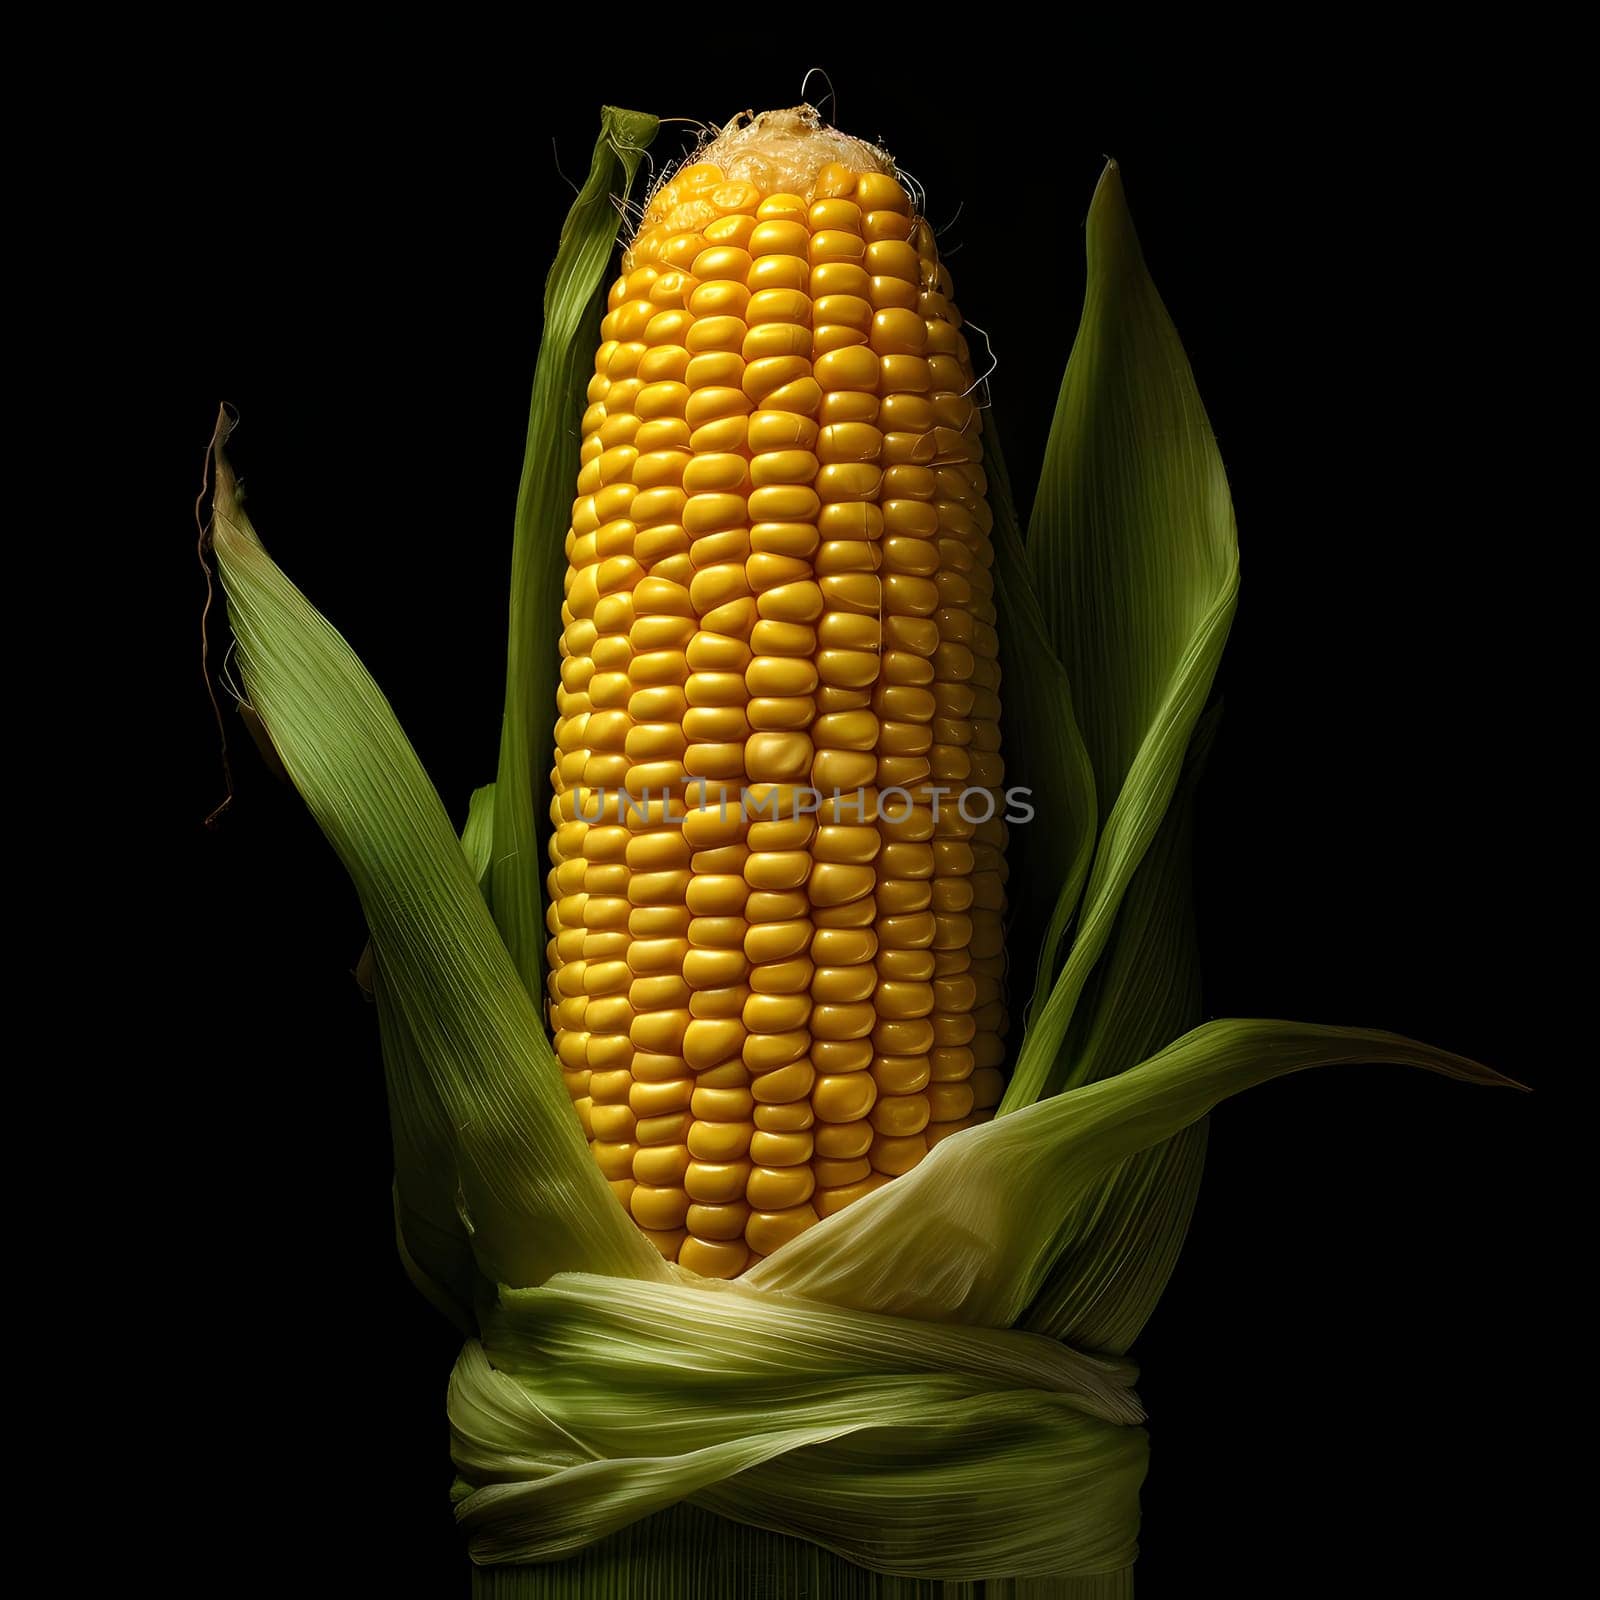 Foam standing large corn cob in Green Leaf Black isolated background. Corn as a dish of thanksgiving for the harvest. An atmosphere of joy and celebration.